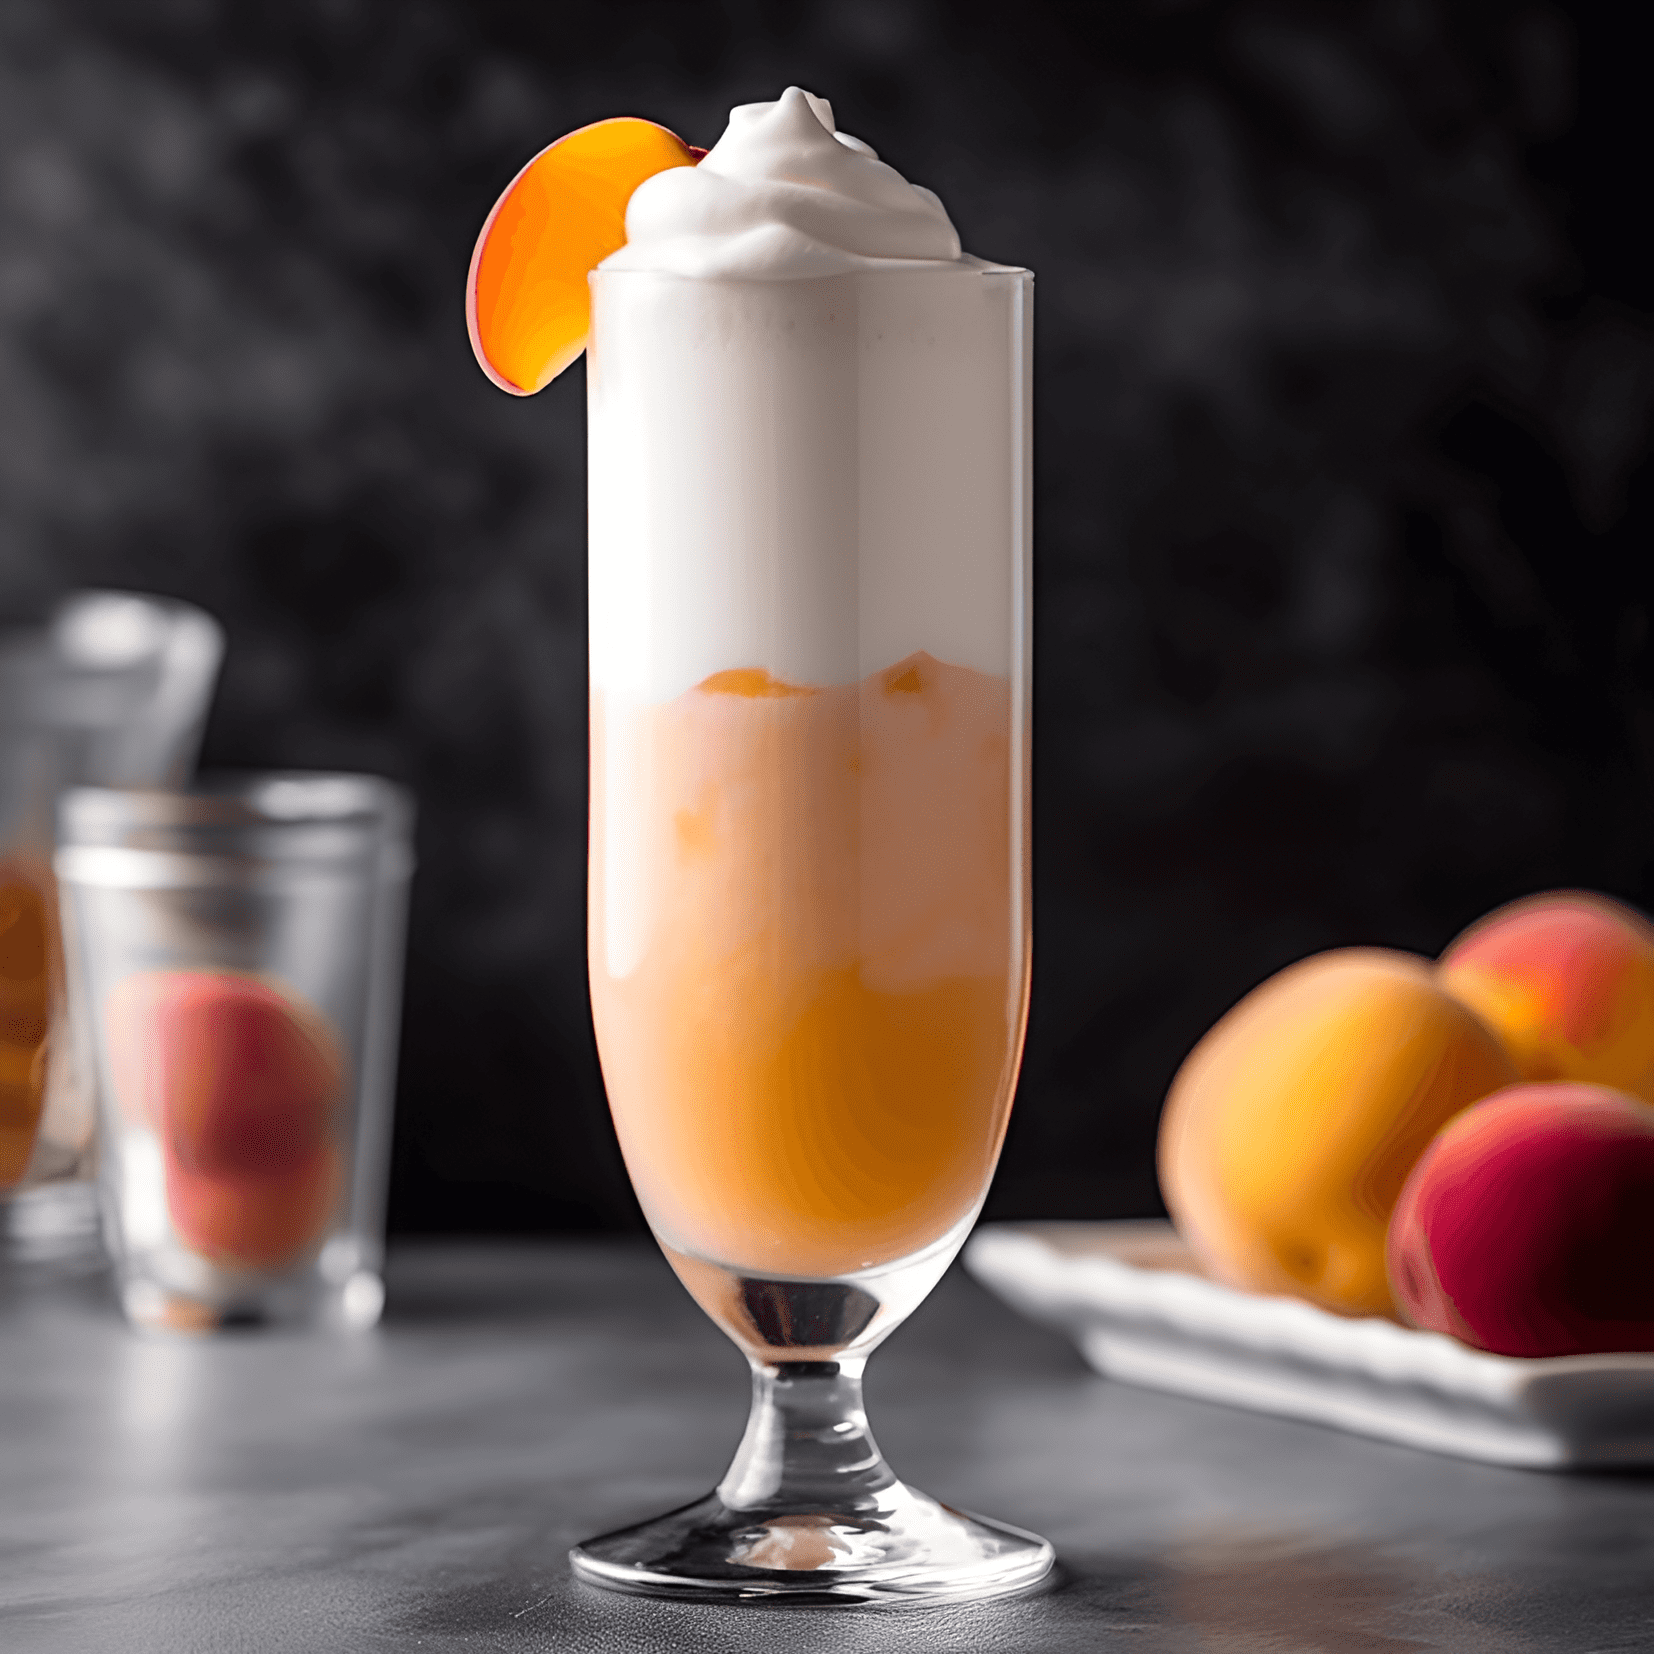 Peaches and Cream Cocktail Recipe - The Peaches and Cream cocktail is a sweet, creamy, and fruity drink with a hint of tartness from the peaches. The combination of peach and cream creates a smooth, velvety texture that is both refreshing and indulgent.